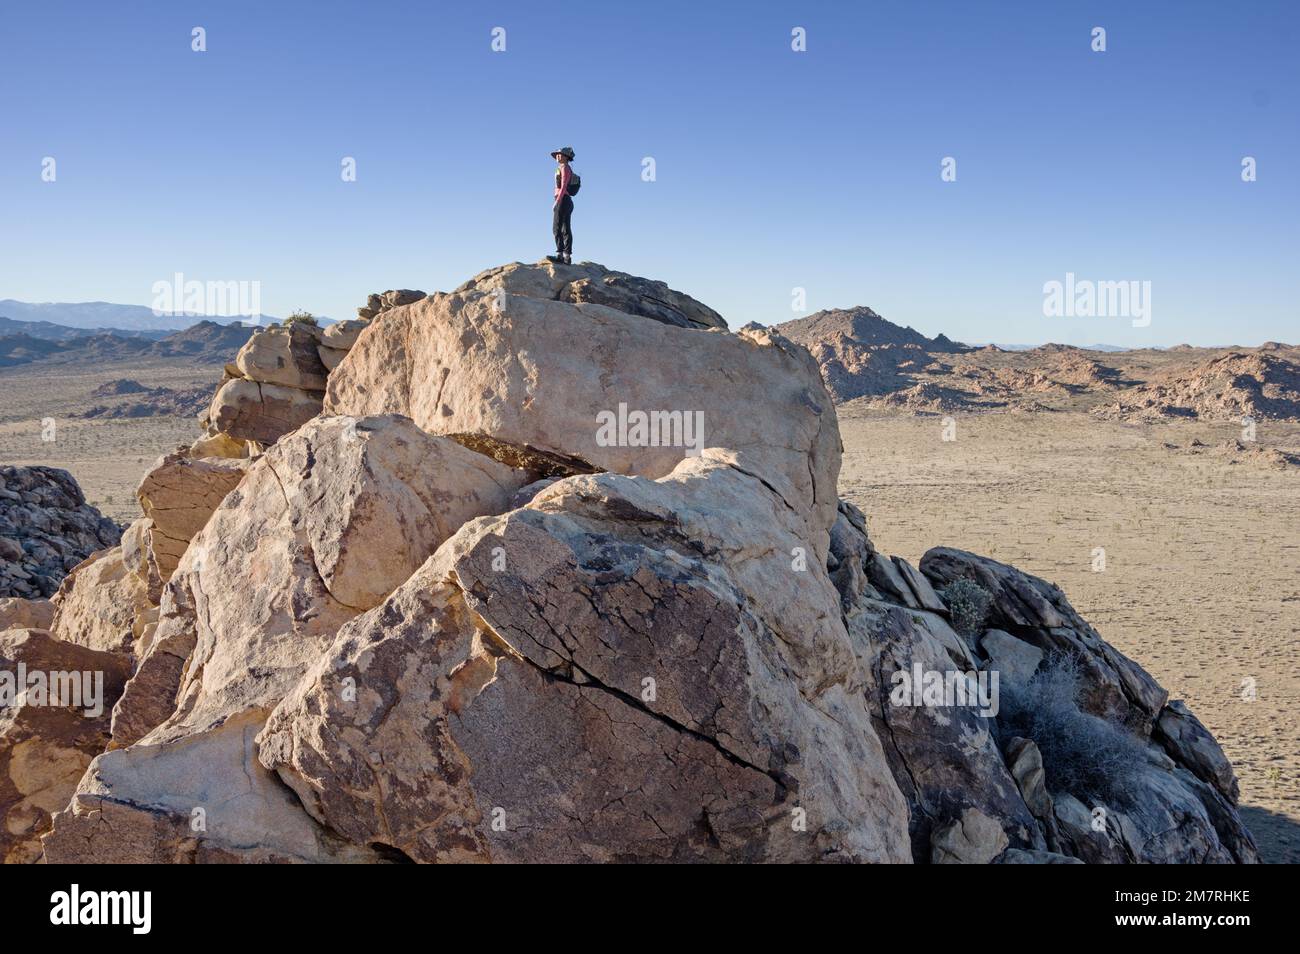 woman on a rocky mountain top in Joshua Tree National Park Stock Photo